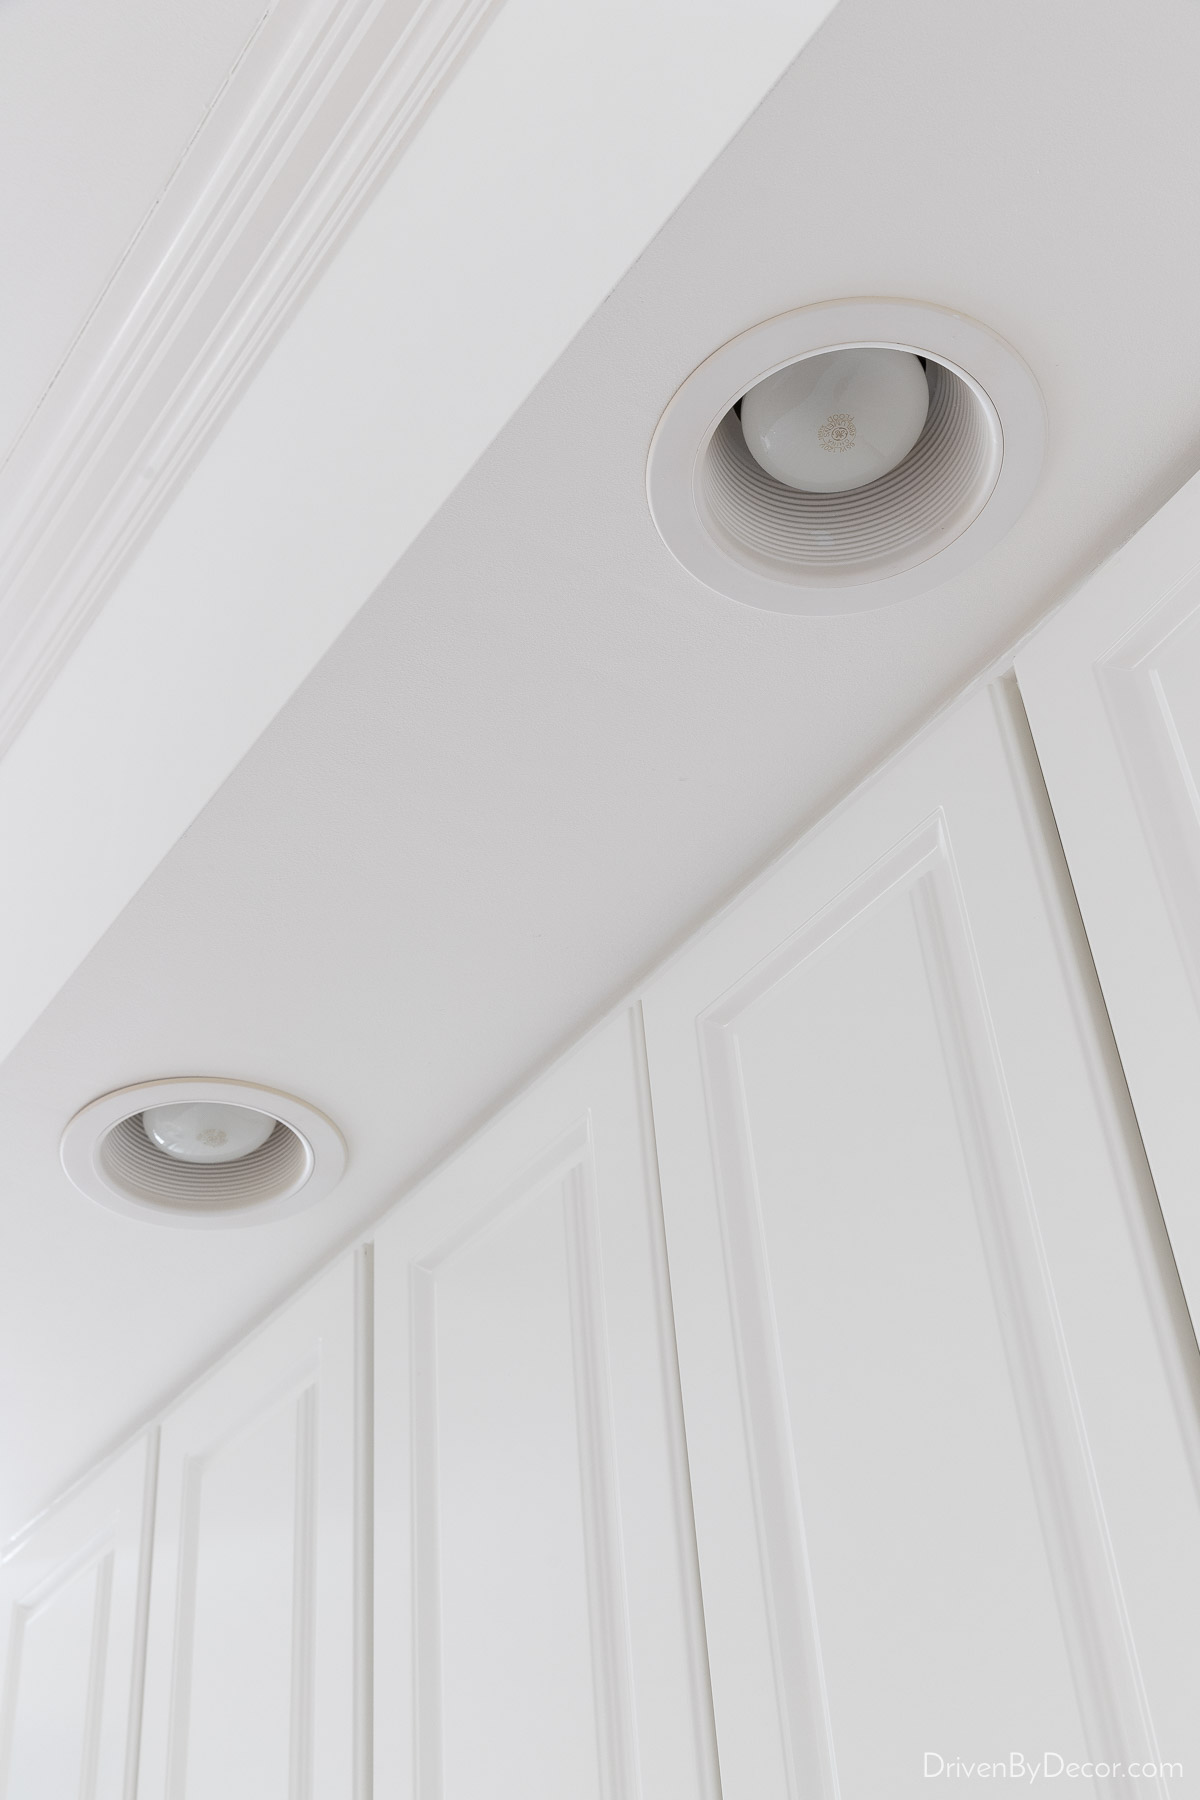 Spray paint your recessed lighting white as part of a kitchen remodel on a budget!